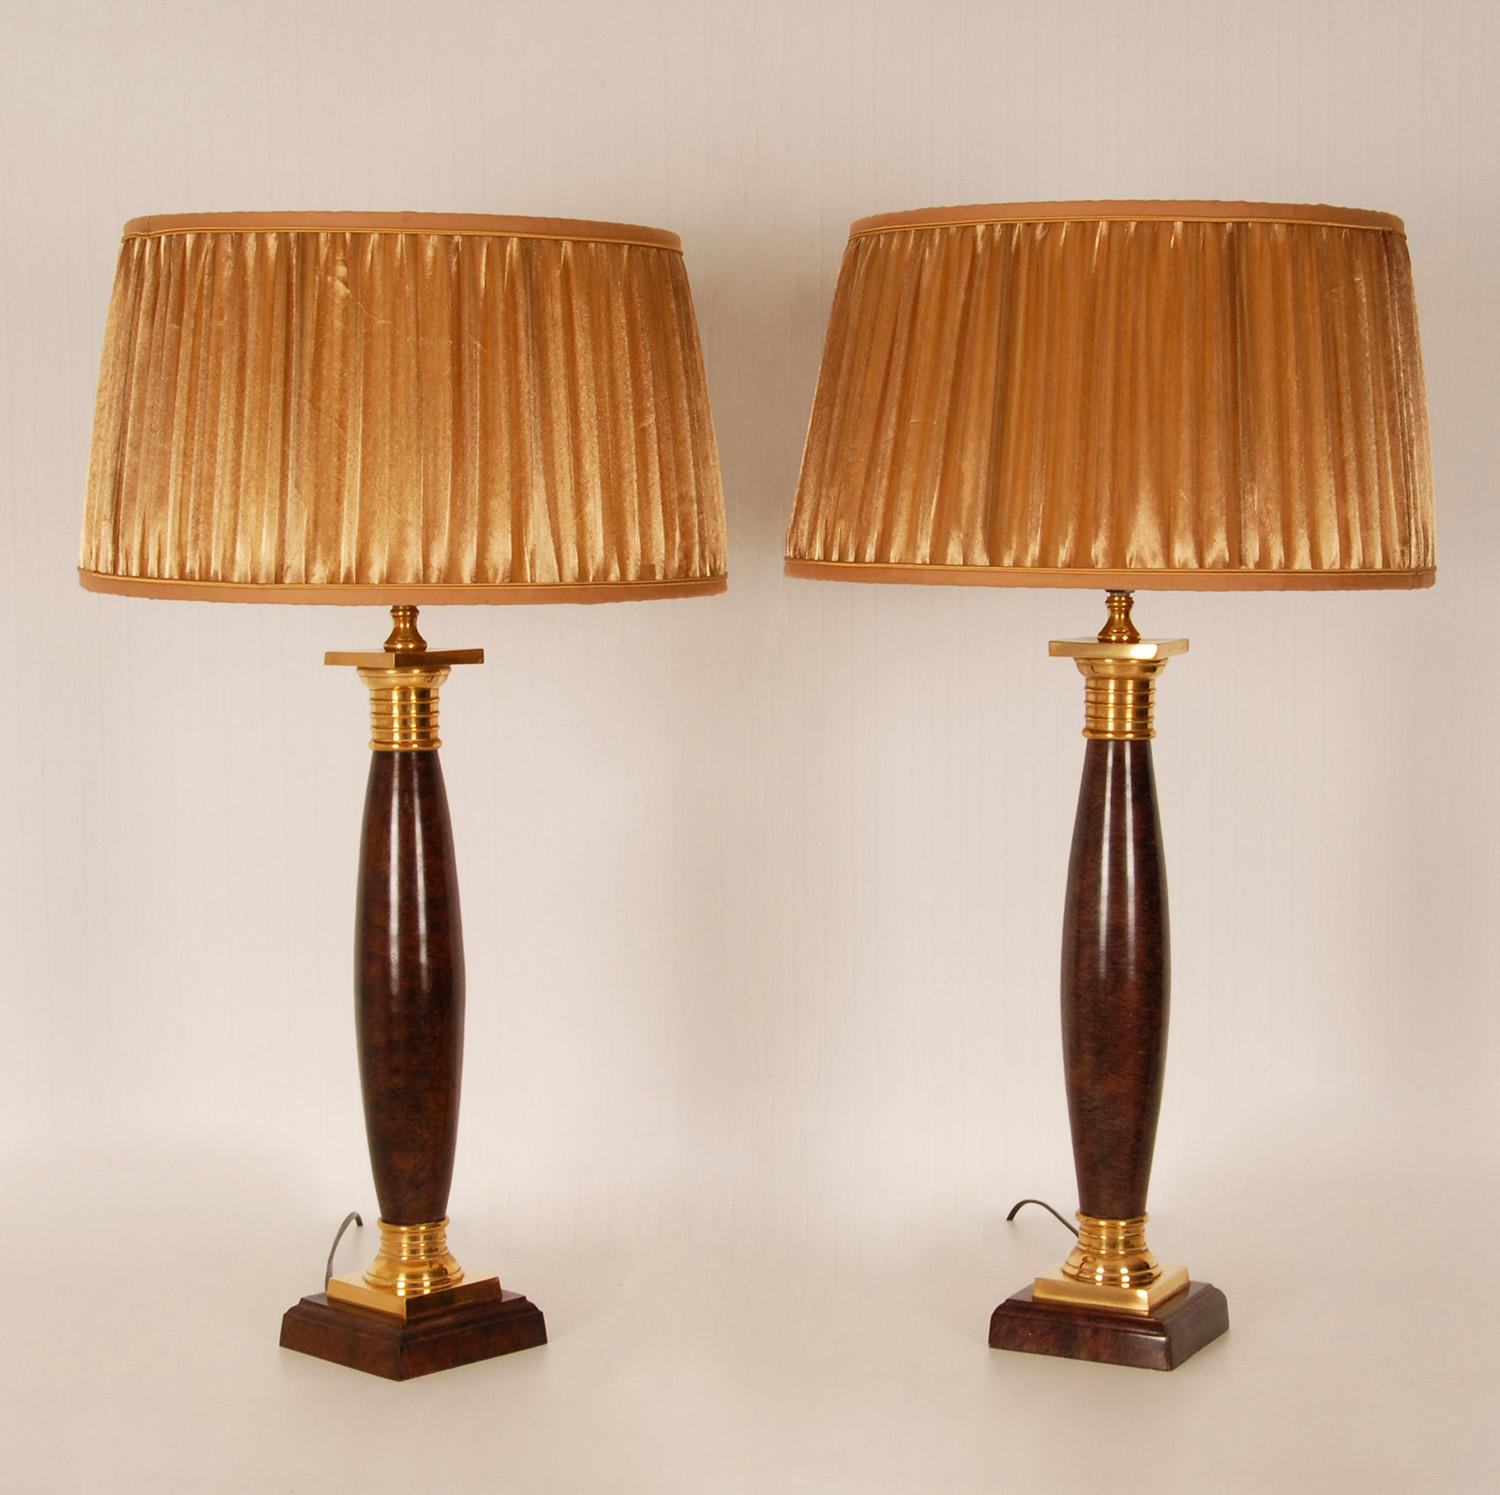 Vintage Napoleonic gold gilded brass and faux rosewood column table lamps
With gold/bronze matching lampshades ( new condition )
Style: Empire, Regency, Neo classical, Napoleonic, Vintage, Antique
Design: In the manner of Caldwell, Chapman